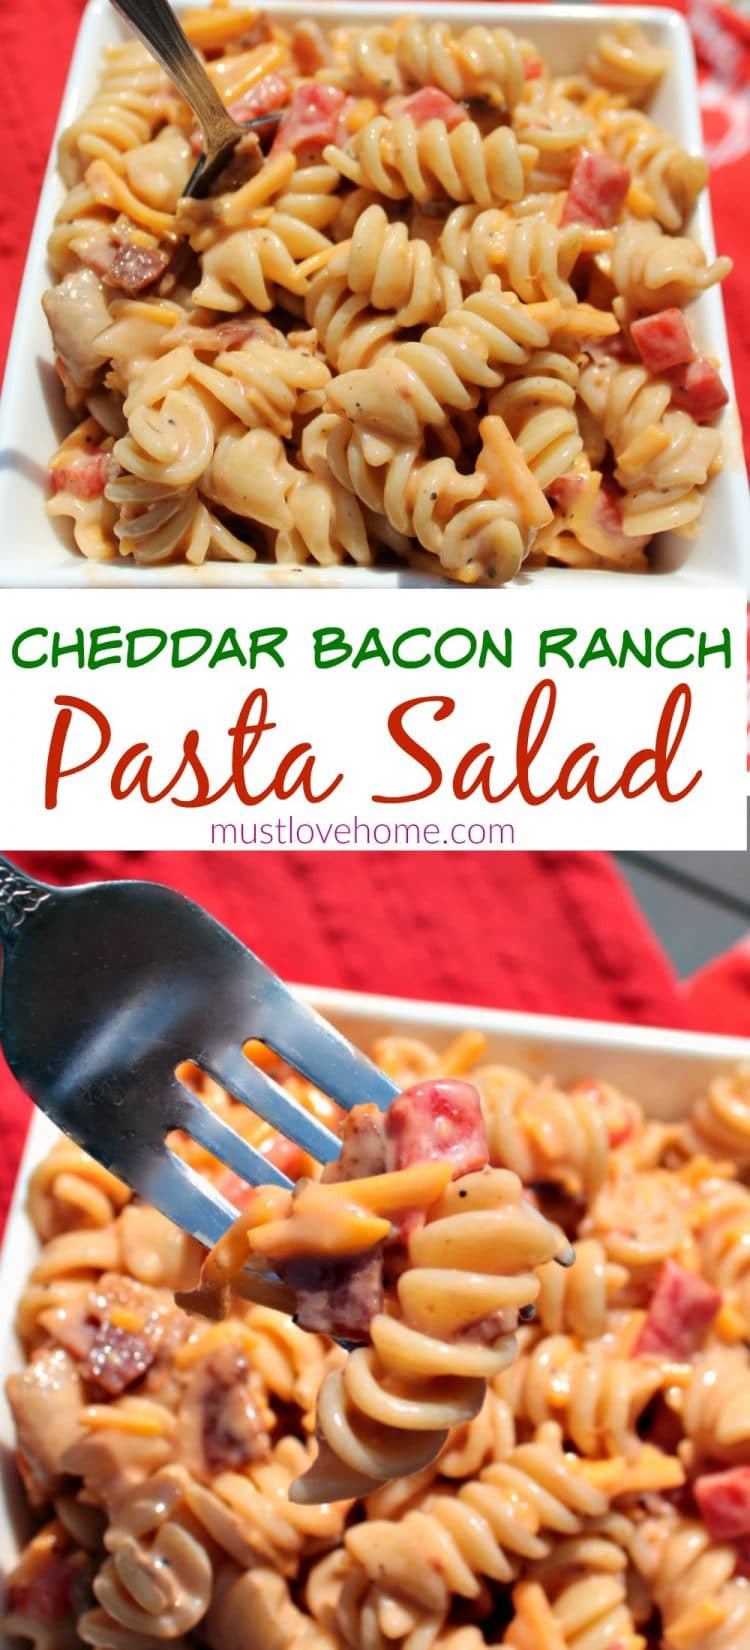 Cheddar Bacon Ranch Pasta Salad - a quick and easy combination of favorite flavors like bacon, cheddar cheese and ranch dressing tossed with pasta and BBQ sauce to create a cold side that will become your new go-to pasta salad dish! Great for picnics and potlucks too!